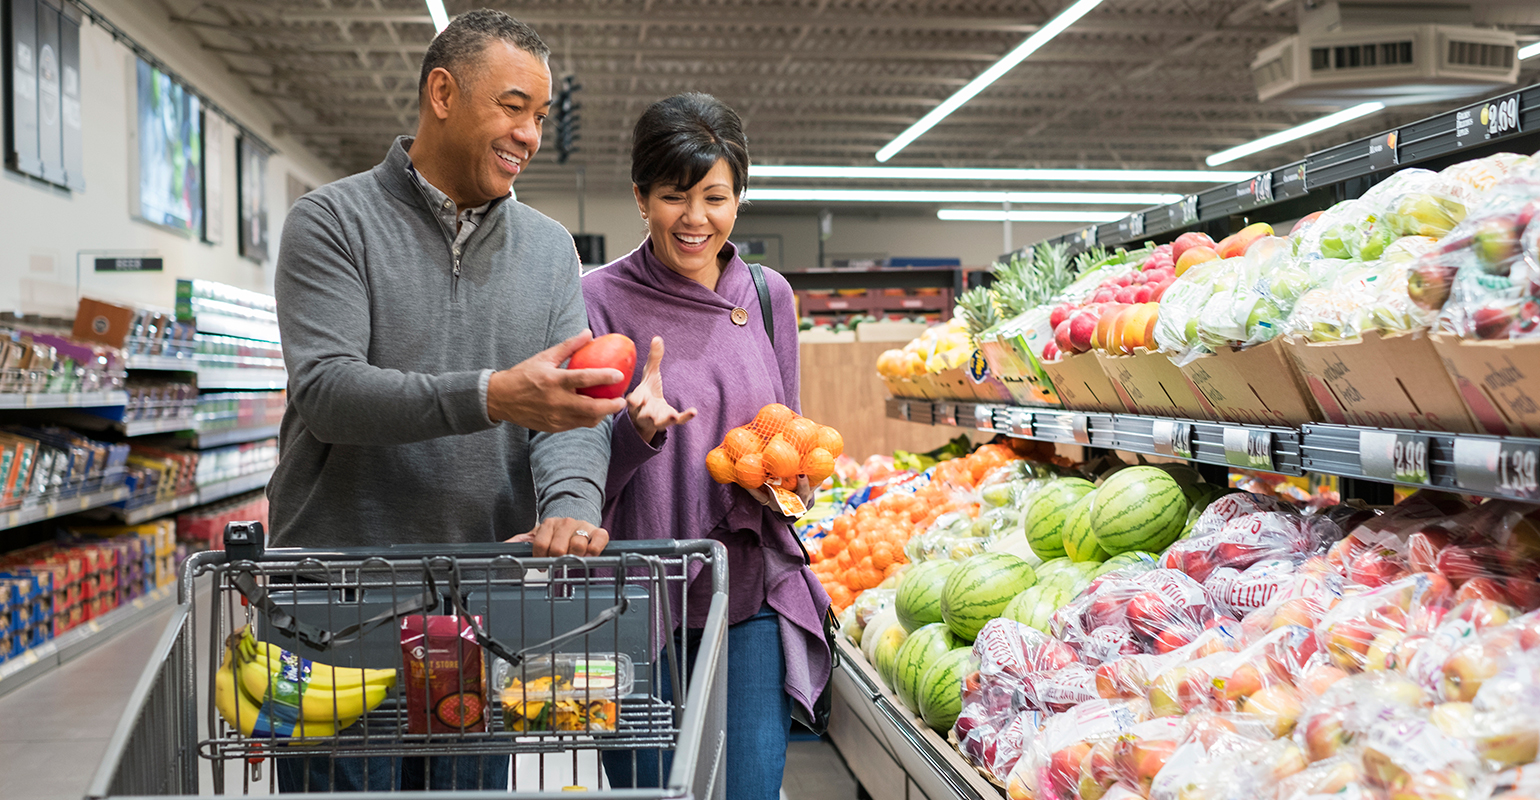 Aldi expands fresh offering with systemwide remodel | Supermarket News